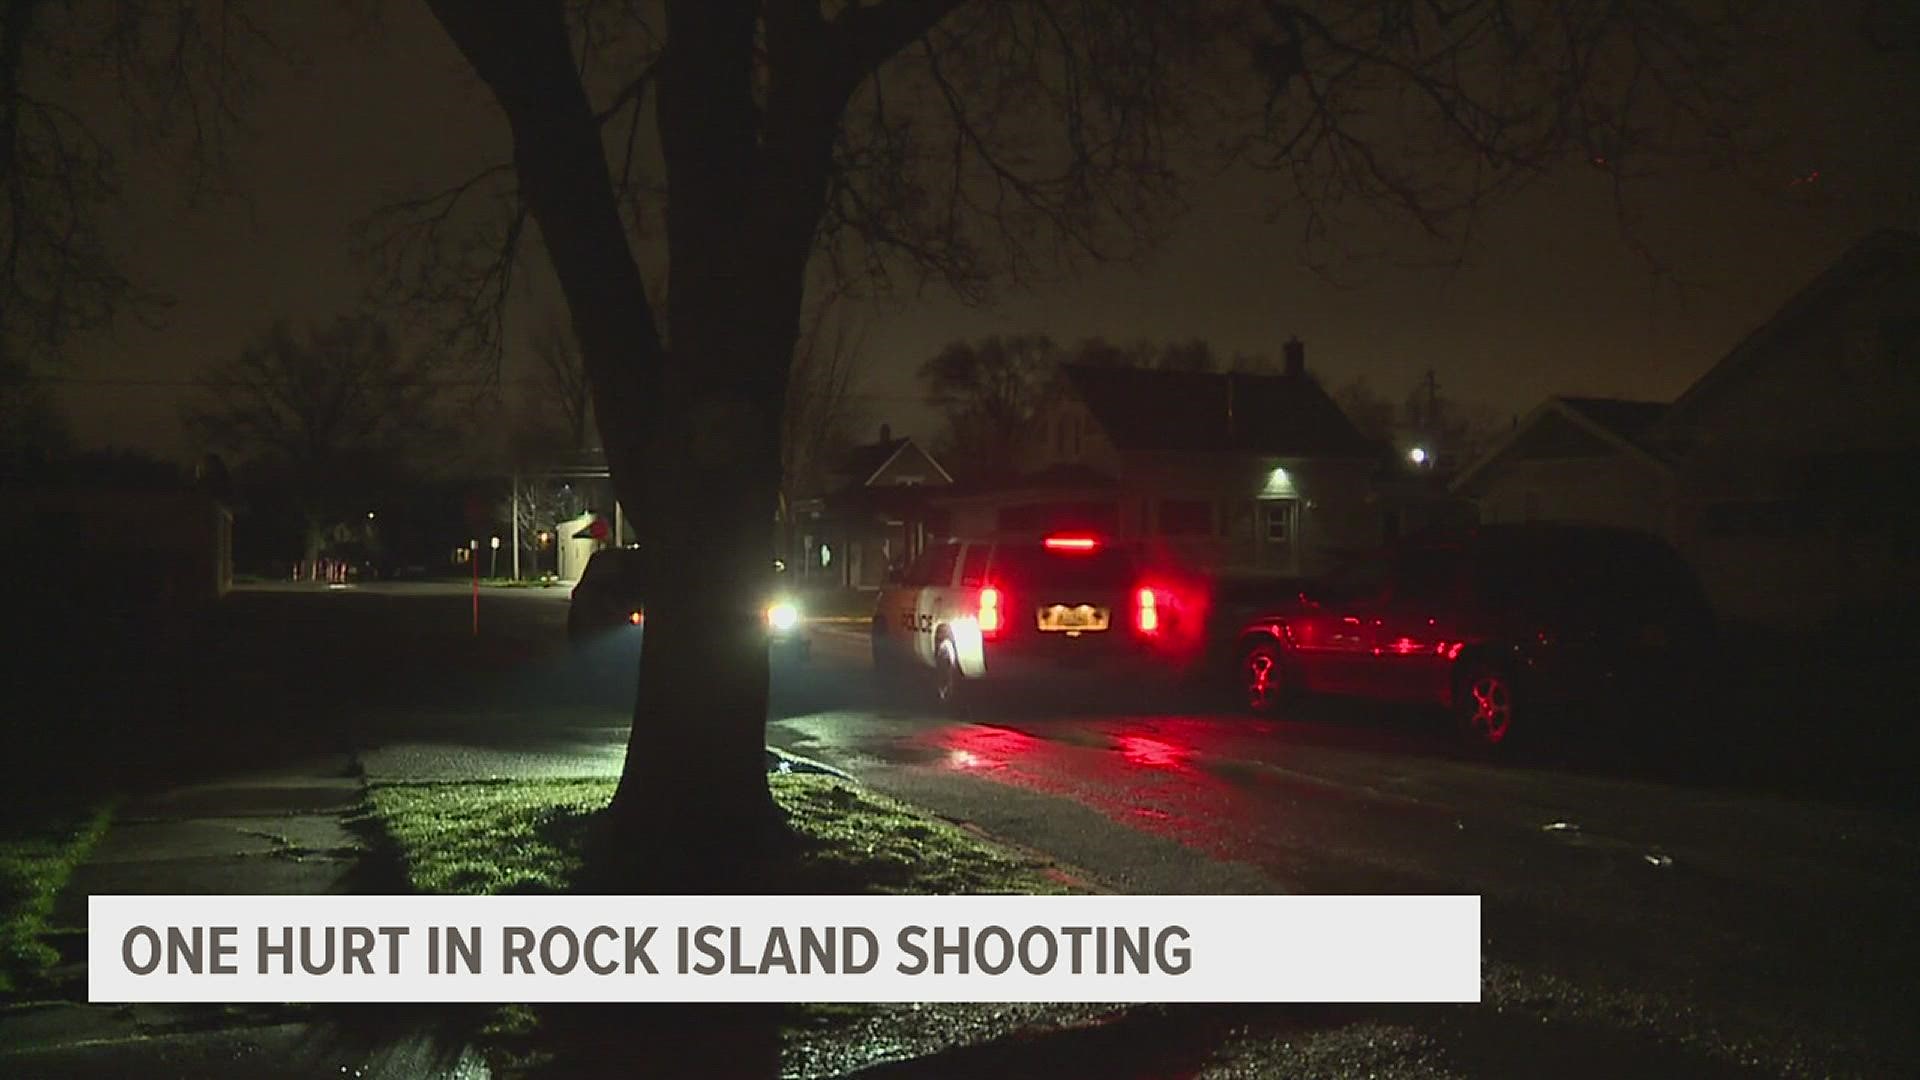 Rock Island police didn't identify the person shot but did say Criminal Investigation will be following up on the case.